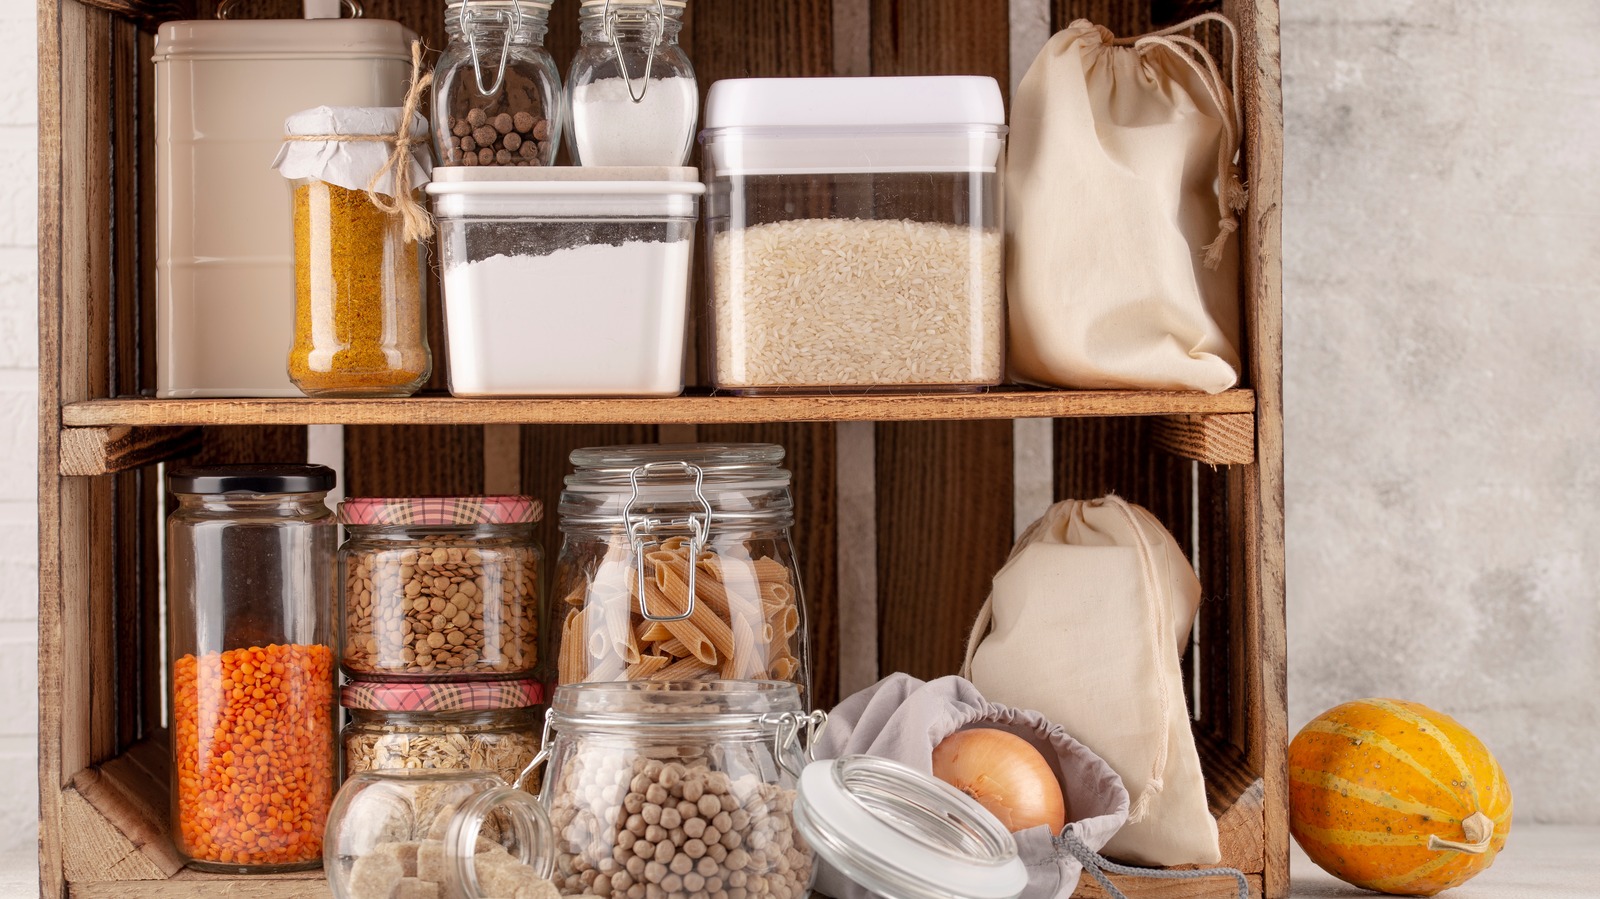 https://www.housedigest.com/img/gallery/an-organizing-expert-explains-how-to-create-more-pantry-storage/l-intro-1667582089.jpg